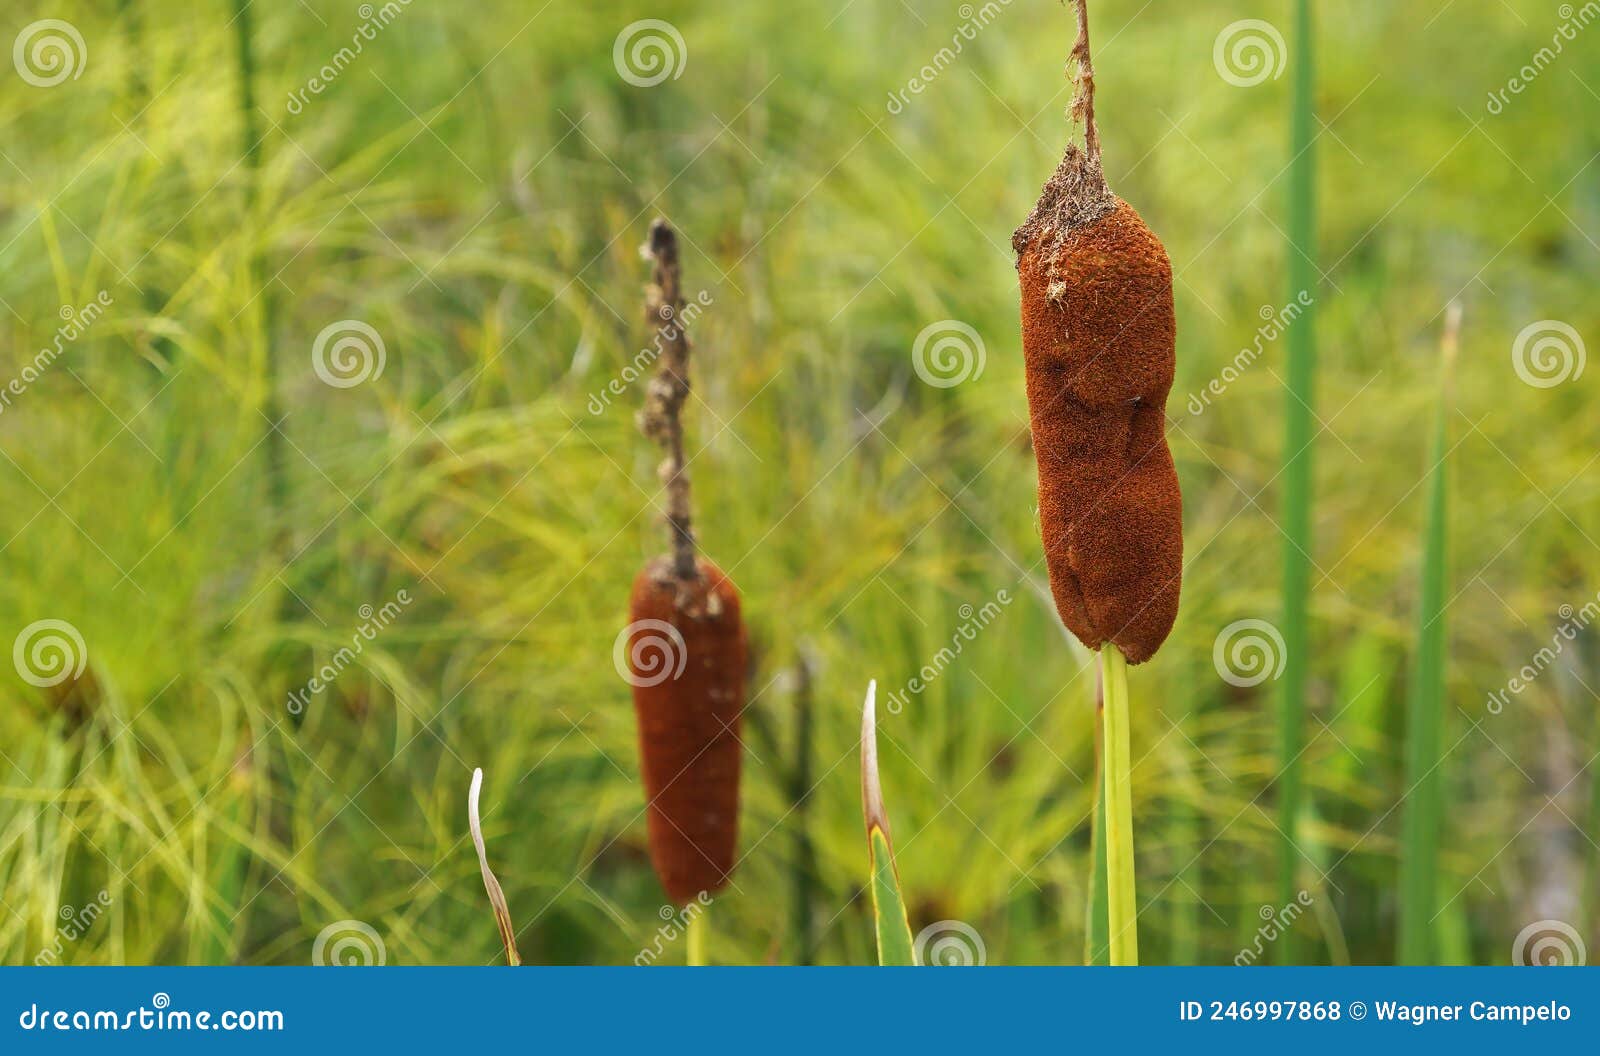 southern cattail or cumbungi, typha domingensis, on tropical garden, minas gerais